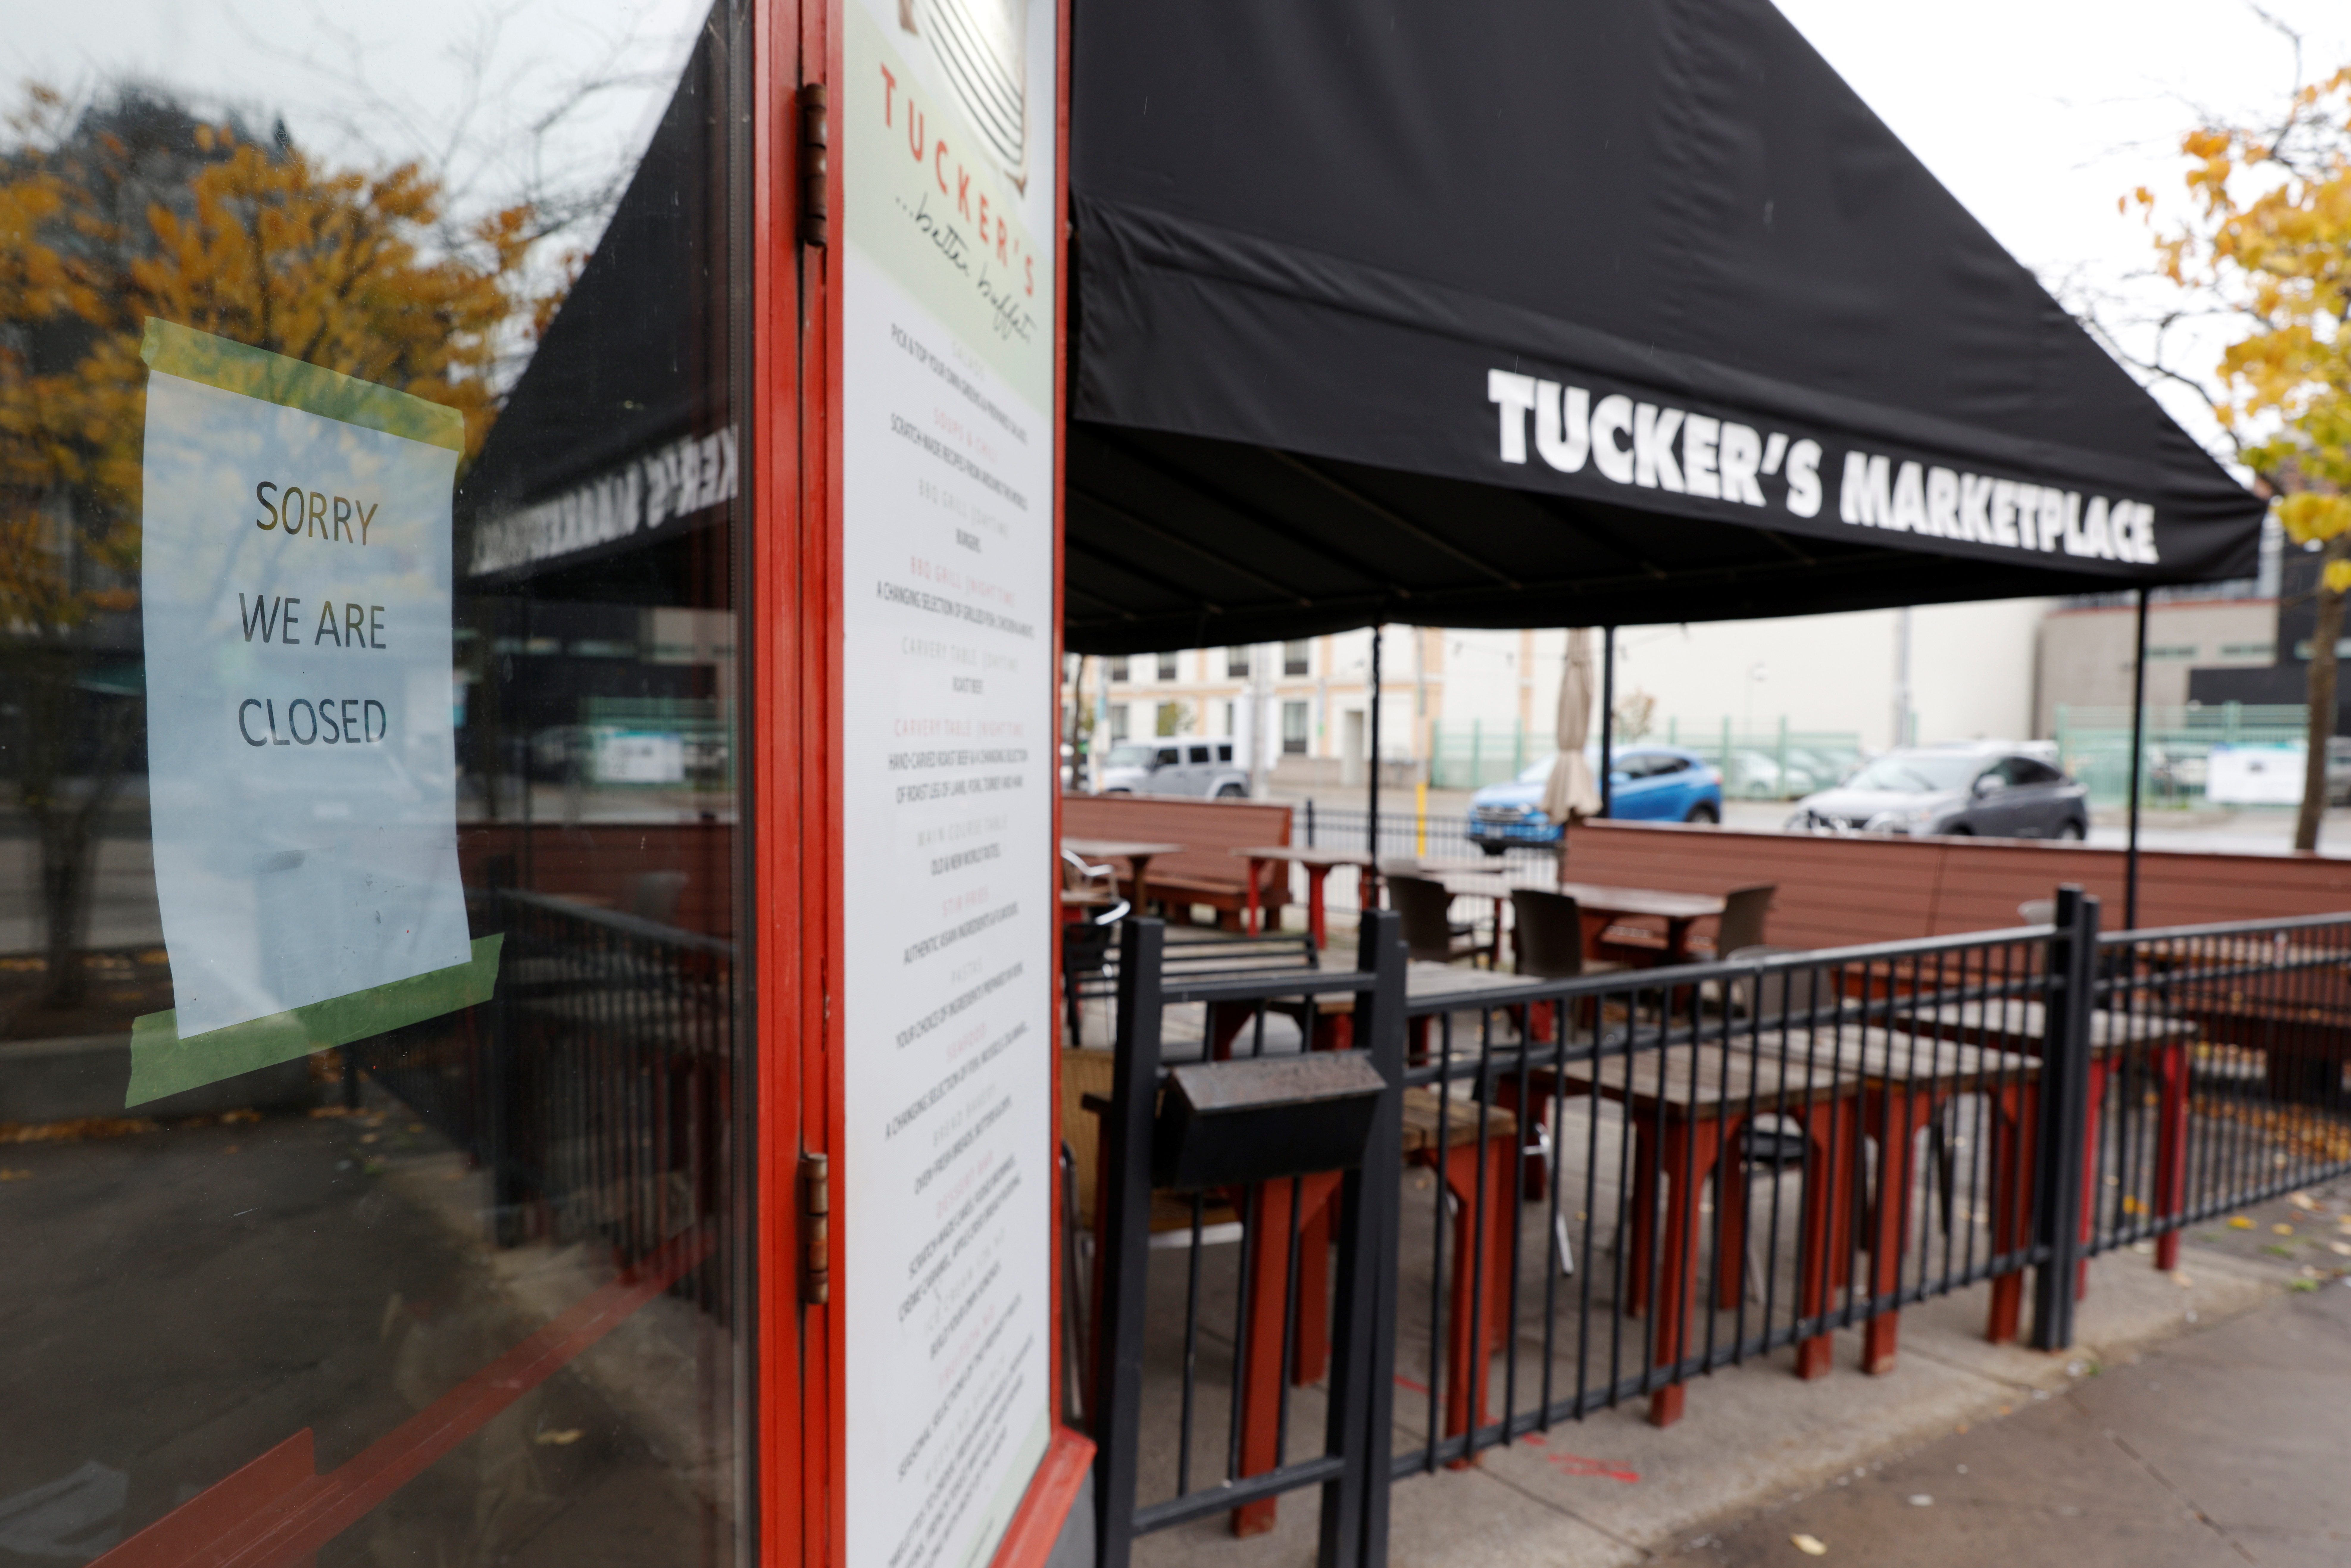 Popular buffet restaurant, Tucker's Marketplace in the ByWard Market is seen closed as a result of measures taken to slow the spread of the coronavirus disease (COVID-19) in Ottawa